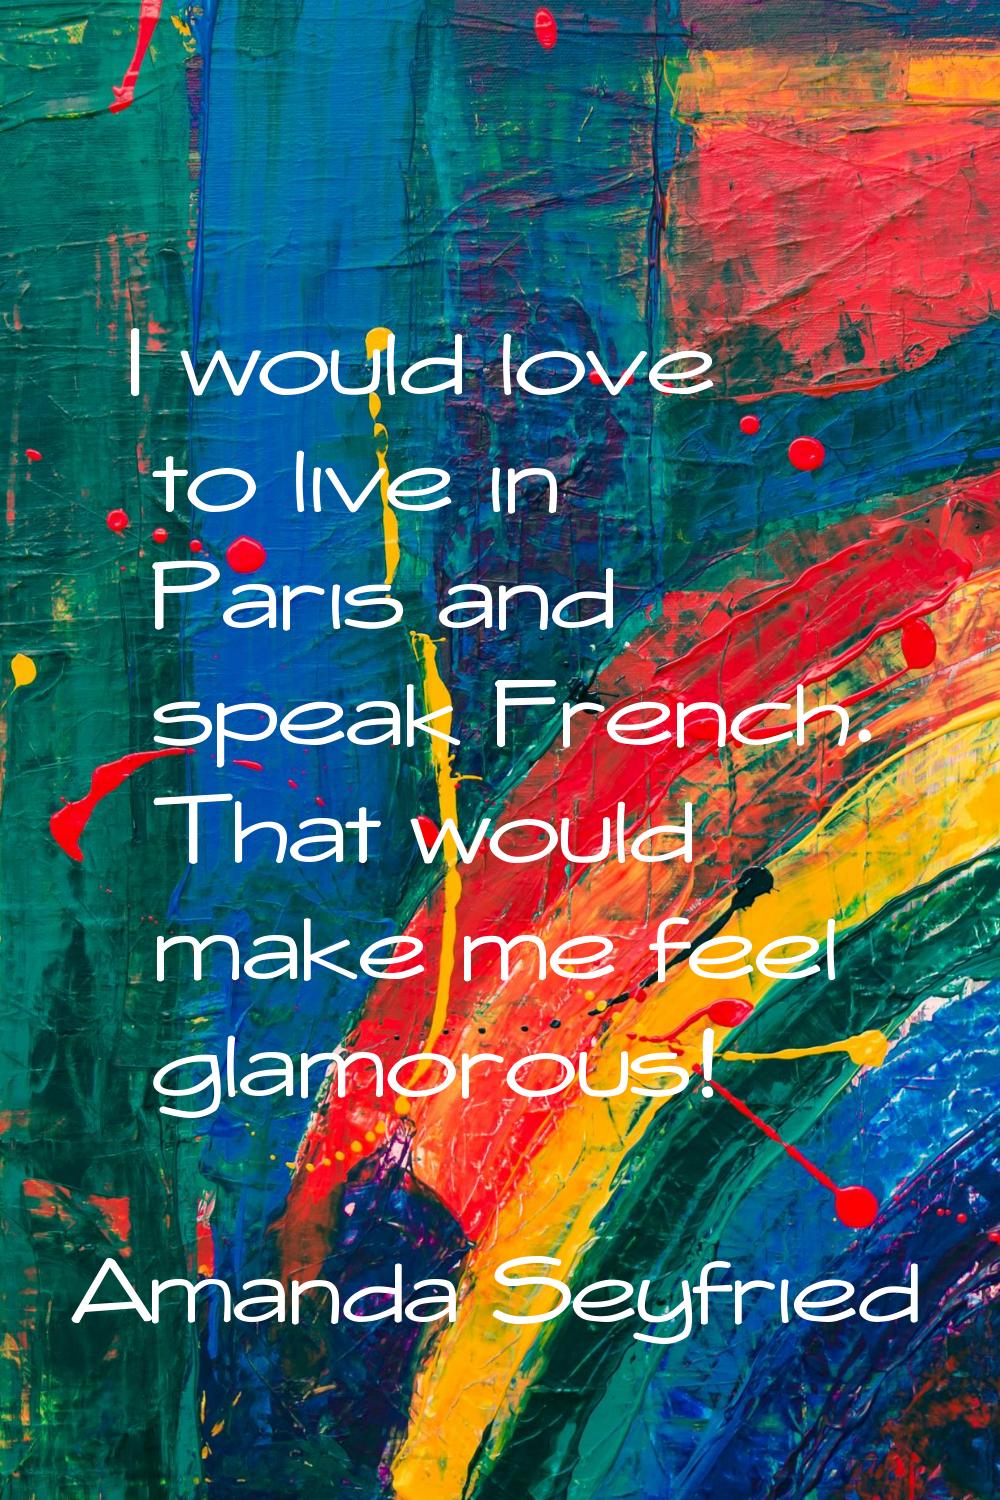 I would love to live in Paris and speak French. That would make me feel glamorous!